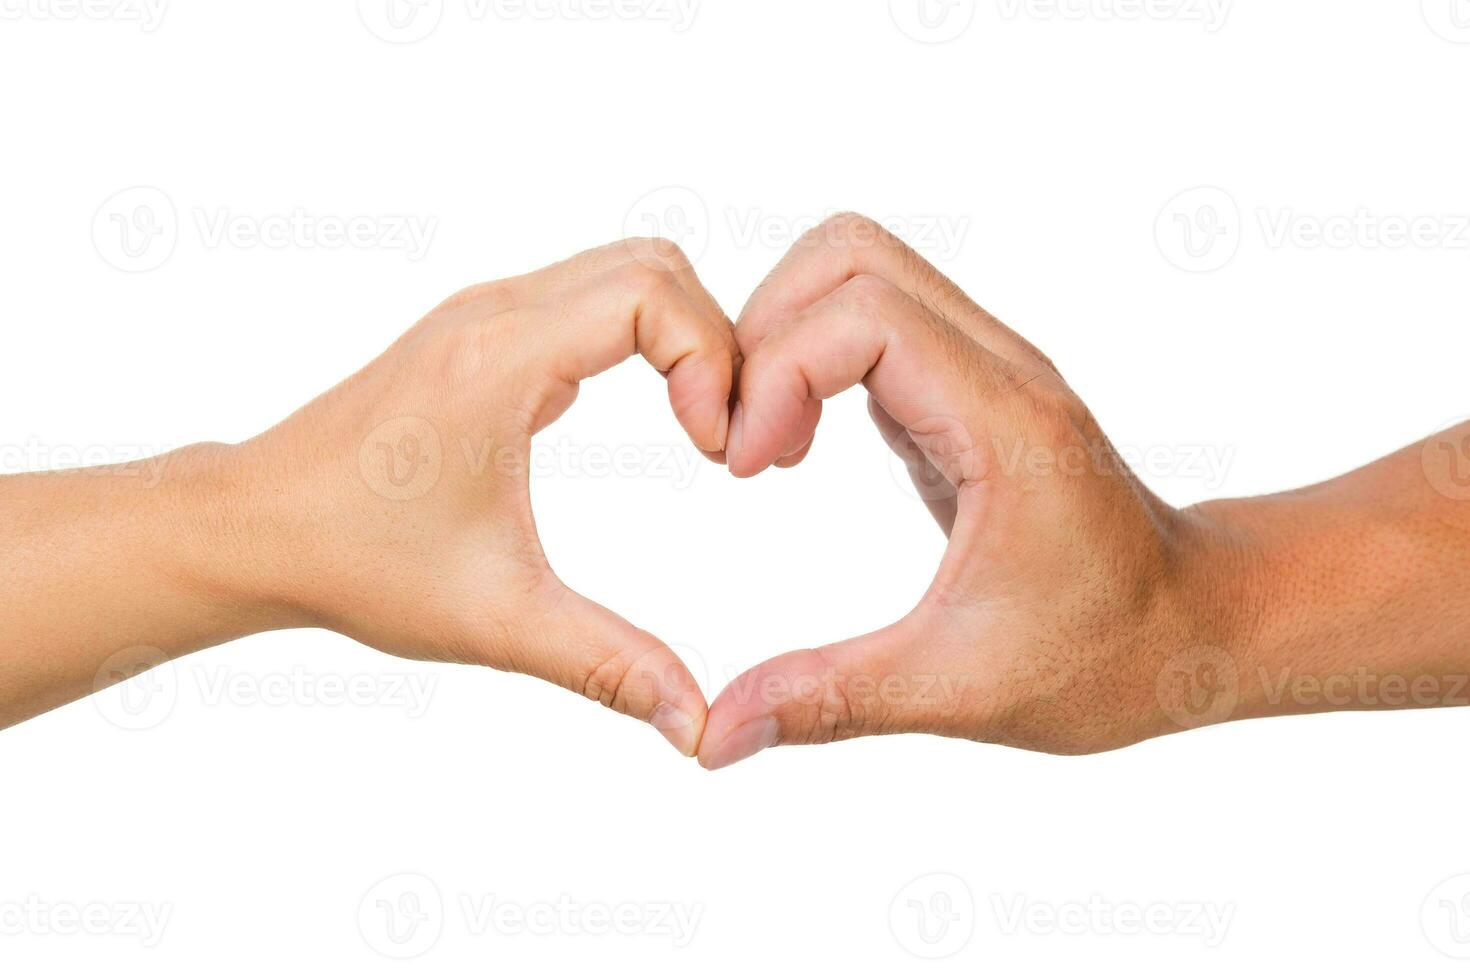 Male and female hands forming a heart shape isolated on white background. Two hands in the shape of a heart. photo